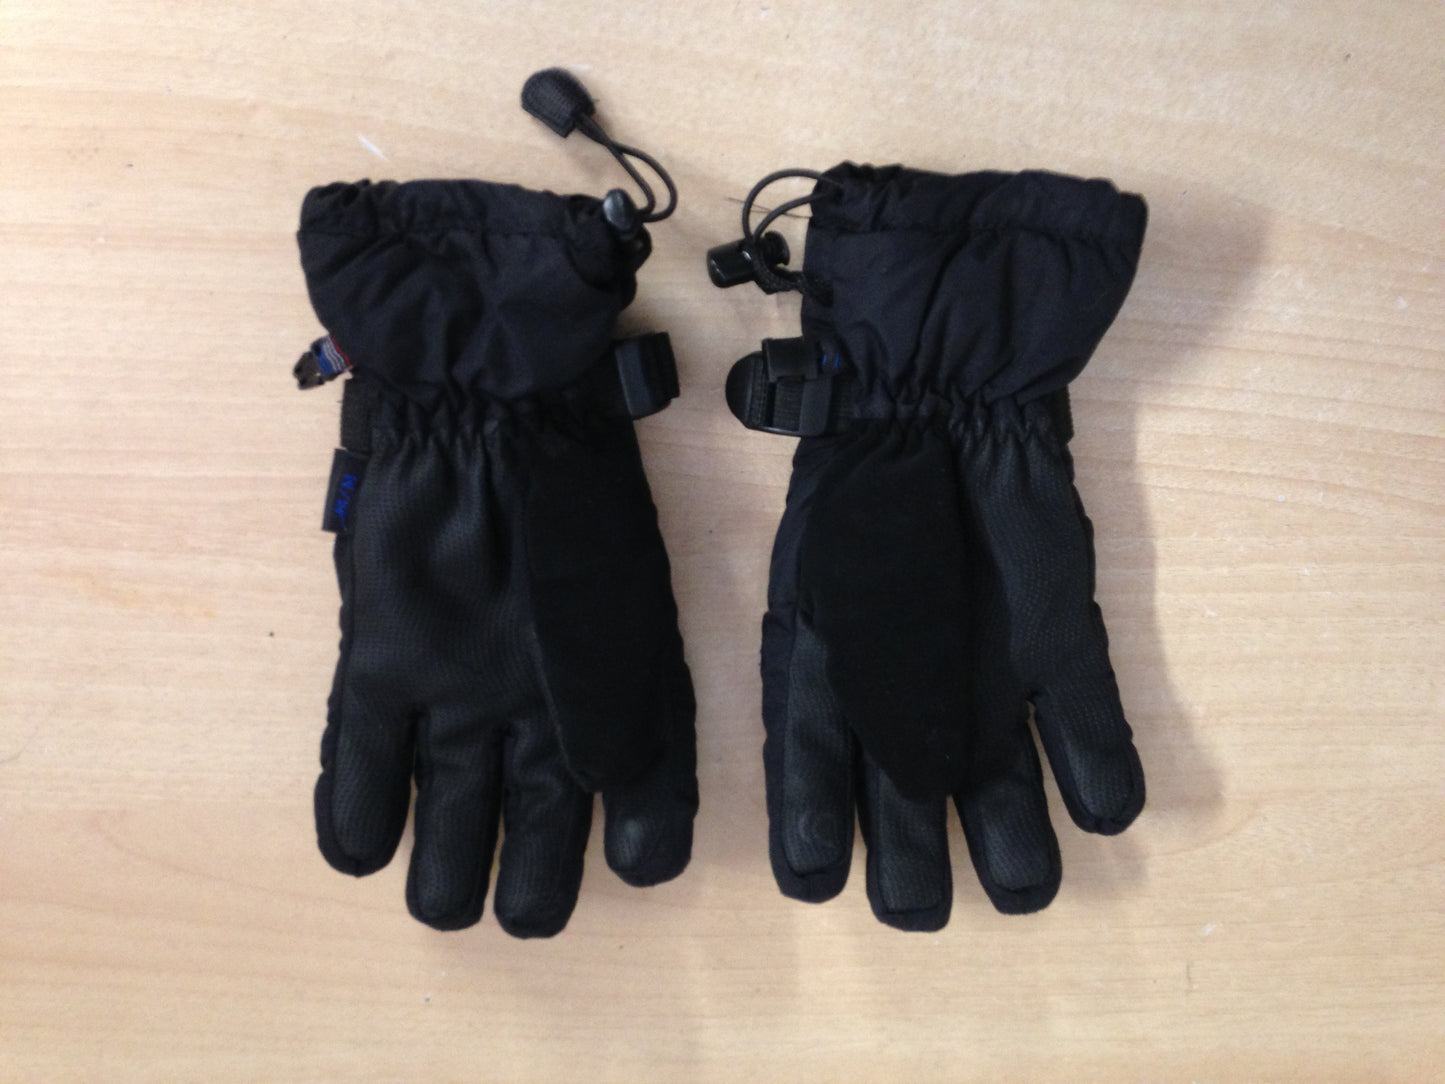 Winter Gloves and Mitts Child Size 10-12 Auclair Skipdry Waterproof Black Snowboarding